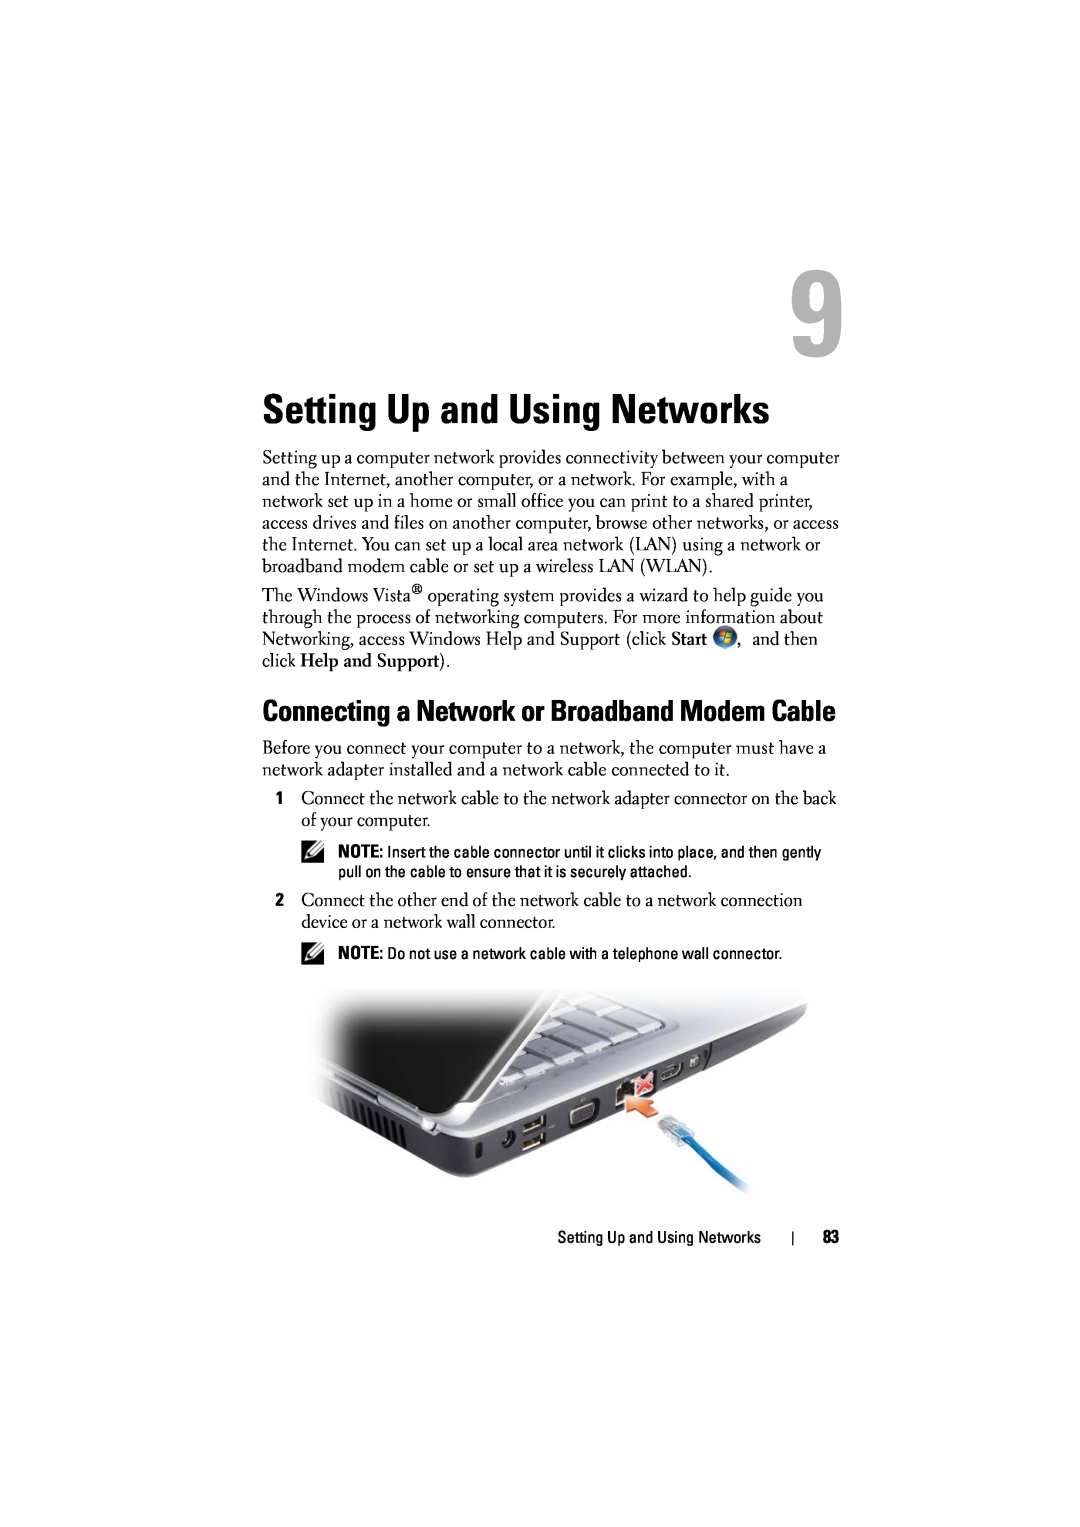 Dell 1526, 1525 owner manual Setting Up and Using Networks, Connecting a Network or Broadband Modem Cable 